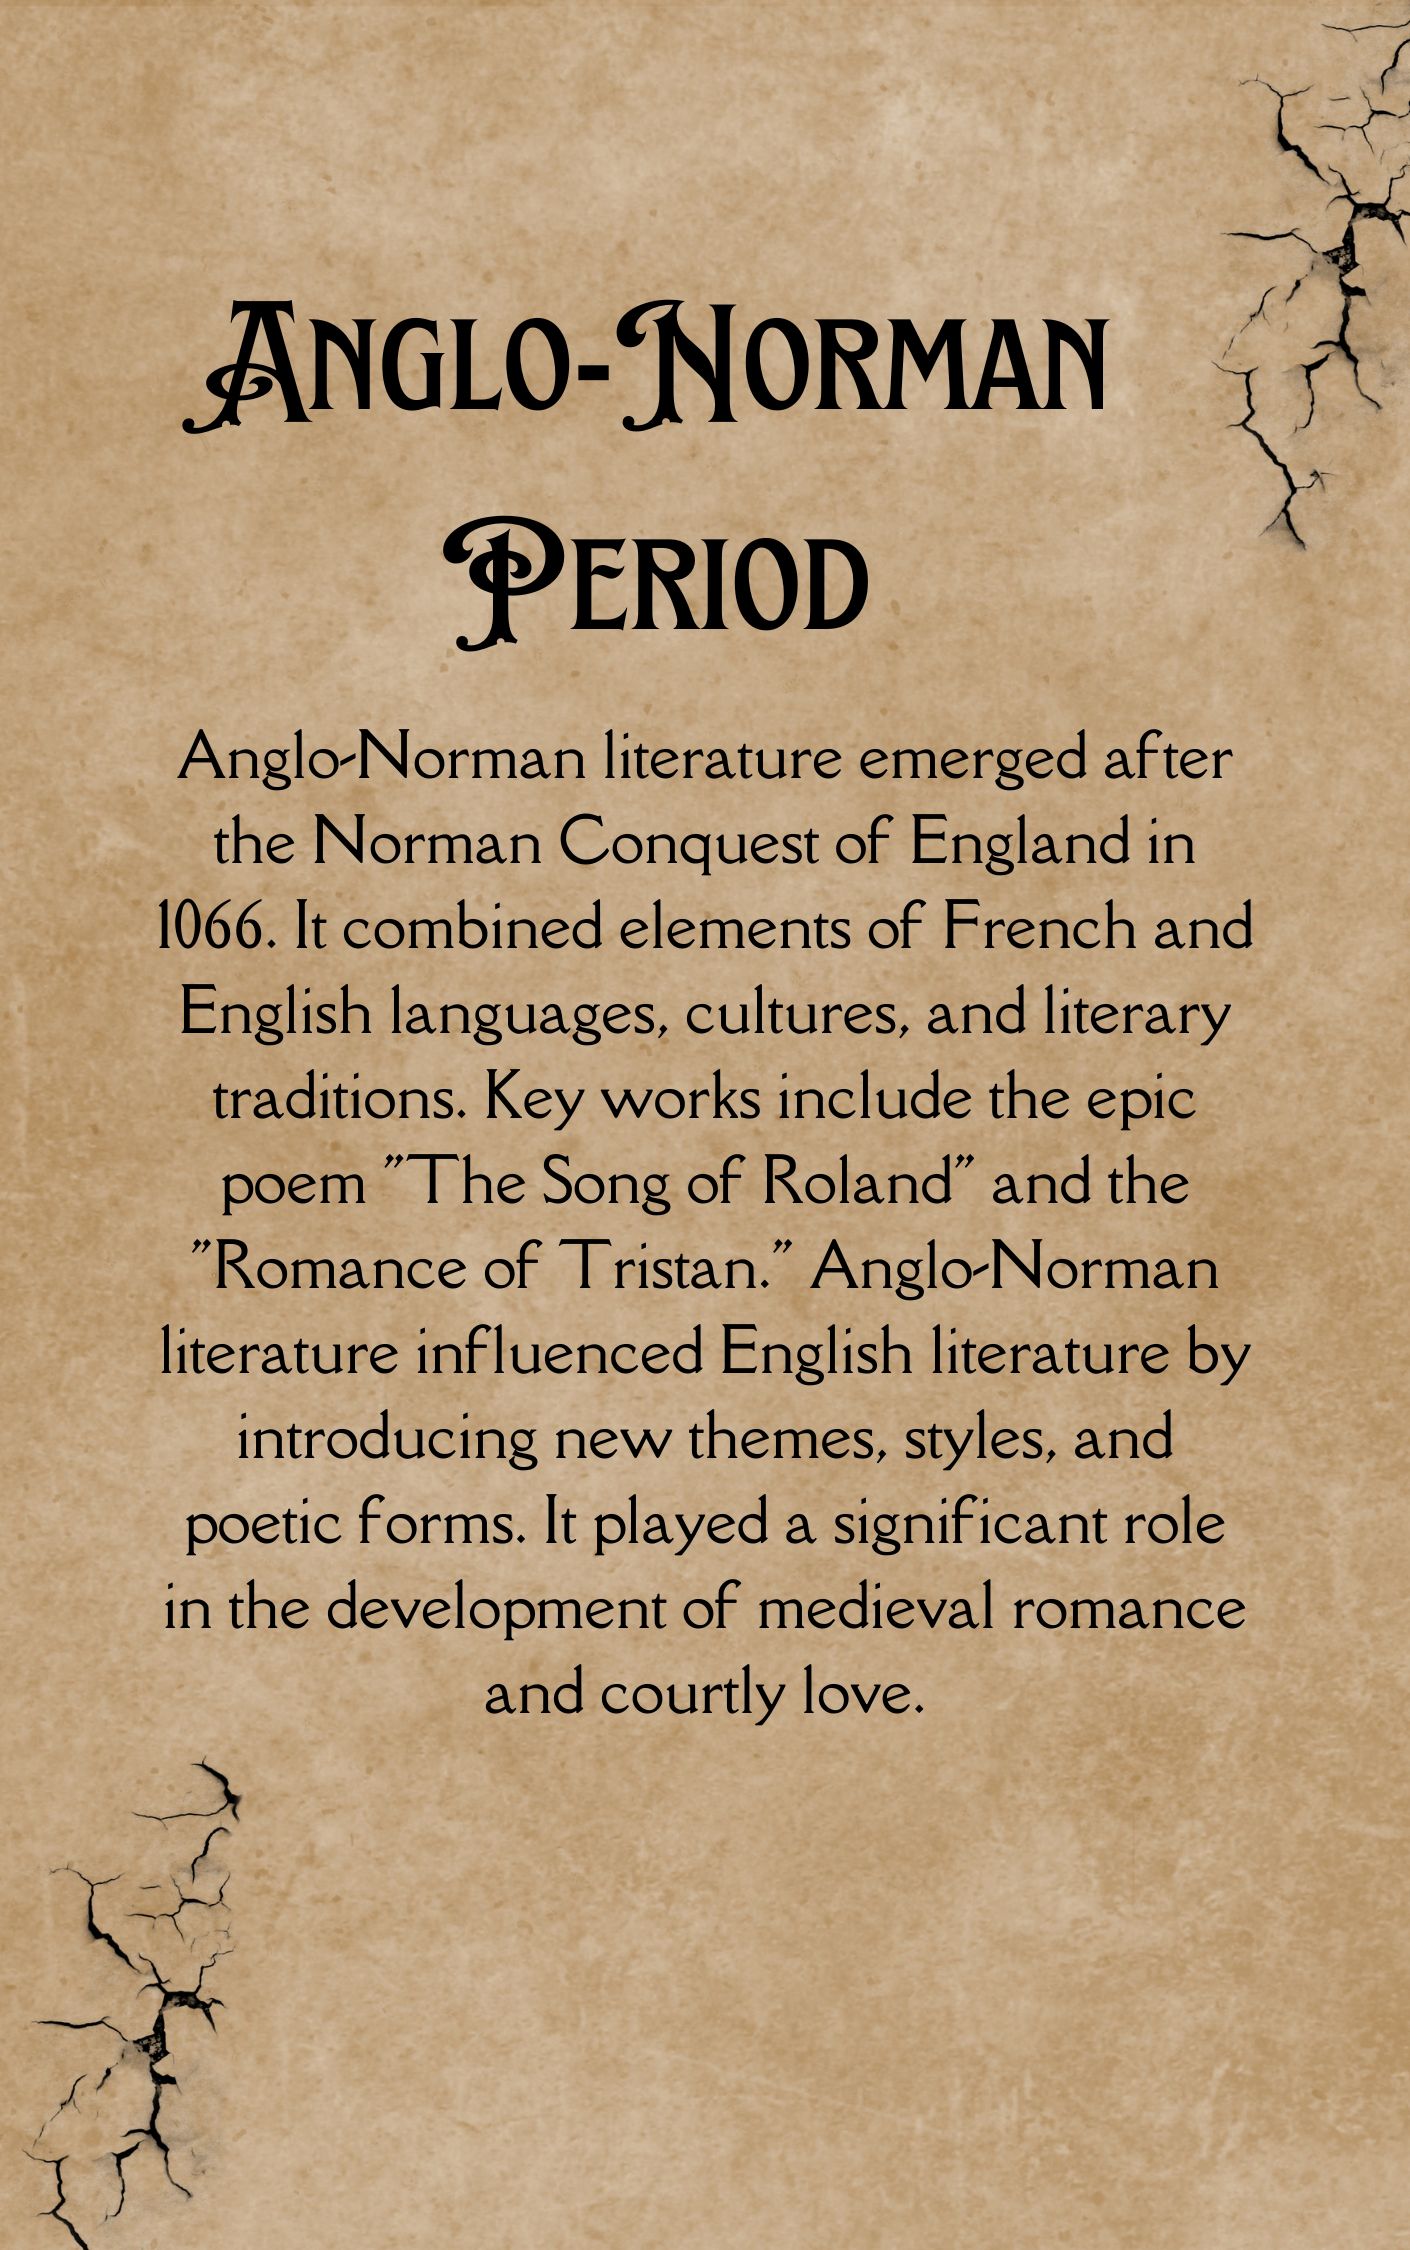 Anglo-Norman Period-Important writers for Ugc Net English